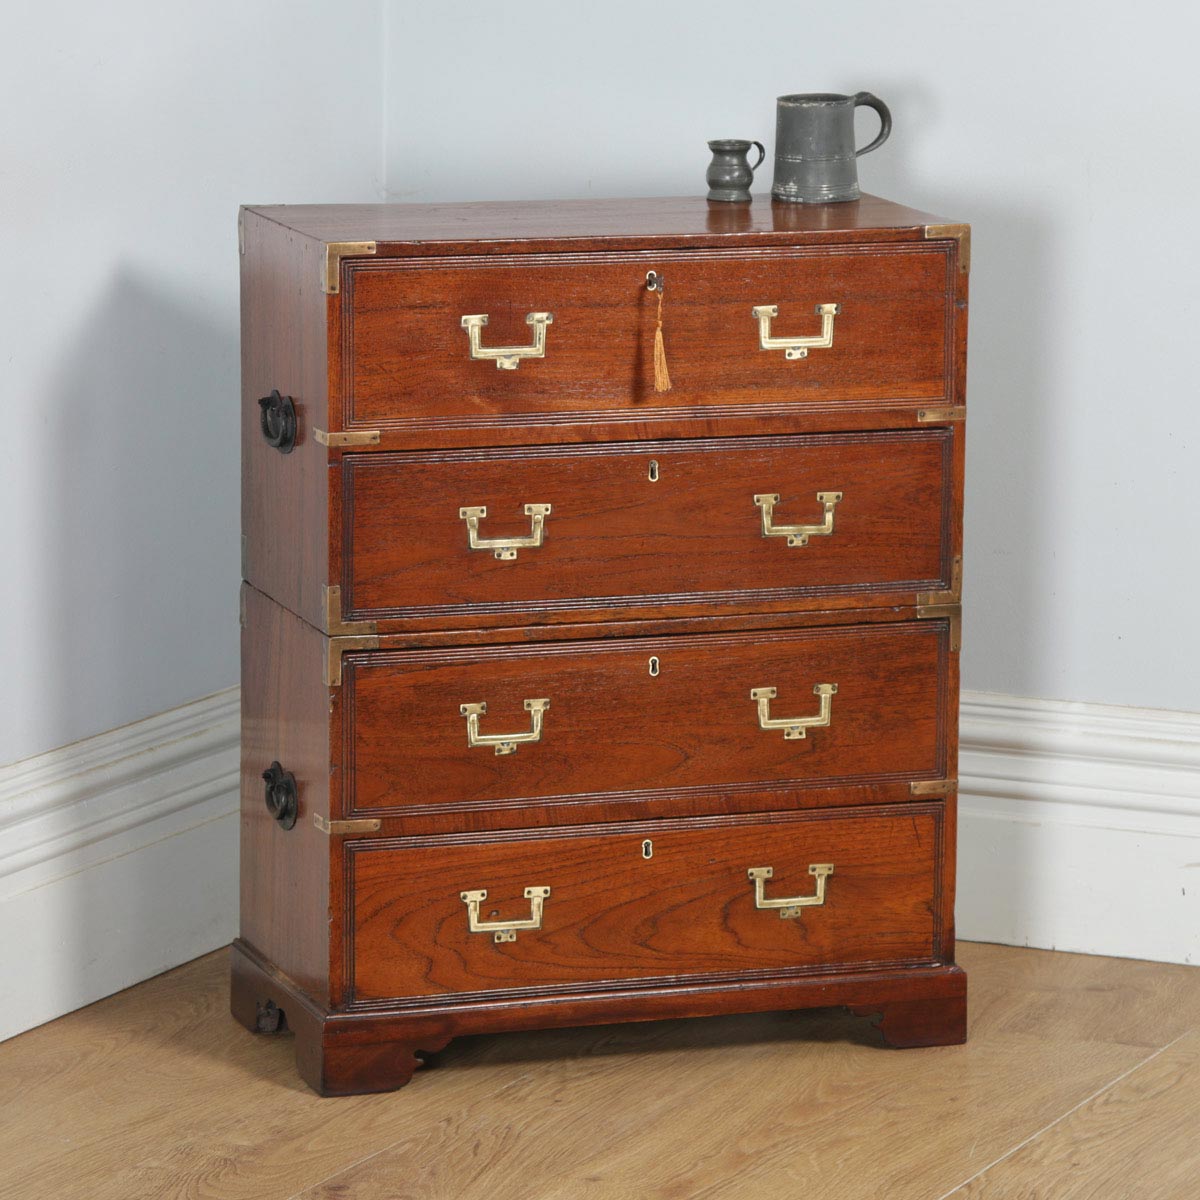 British Campaign Military Chest of Drawers 